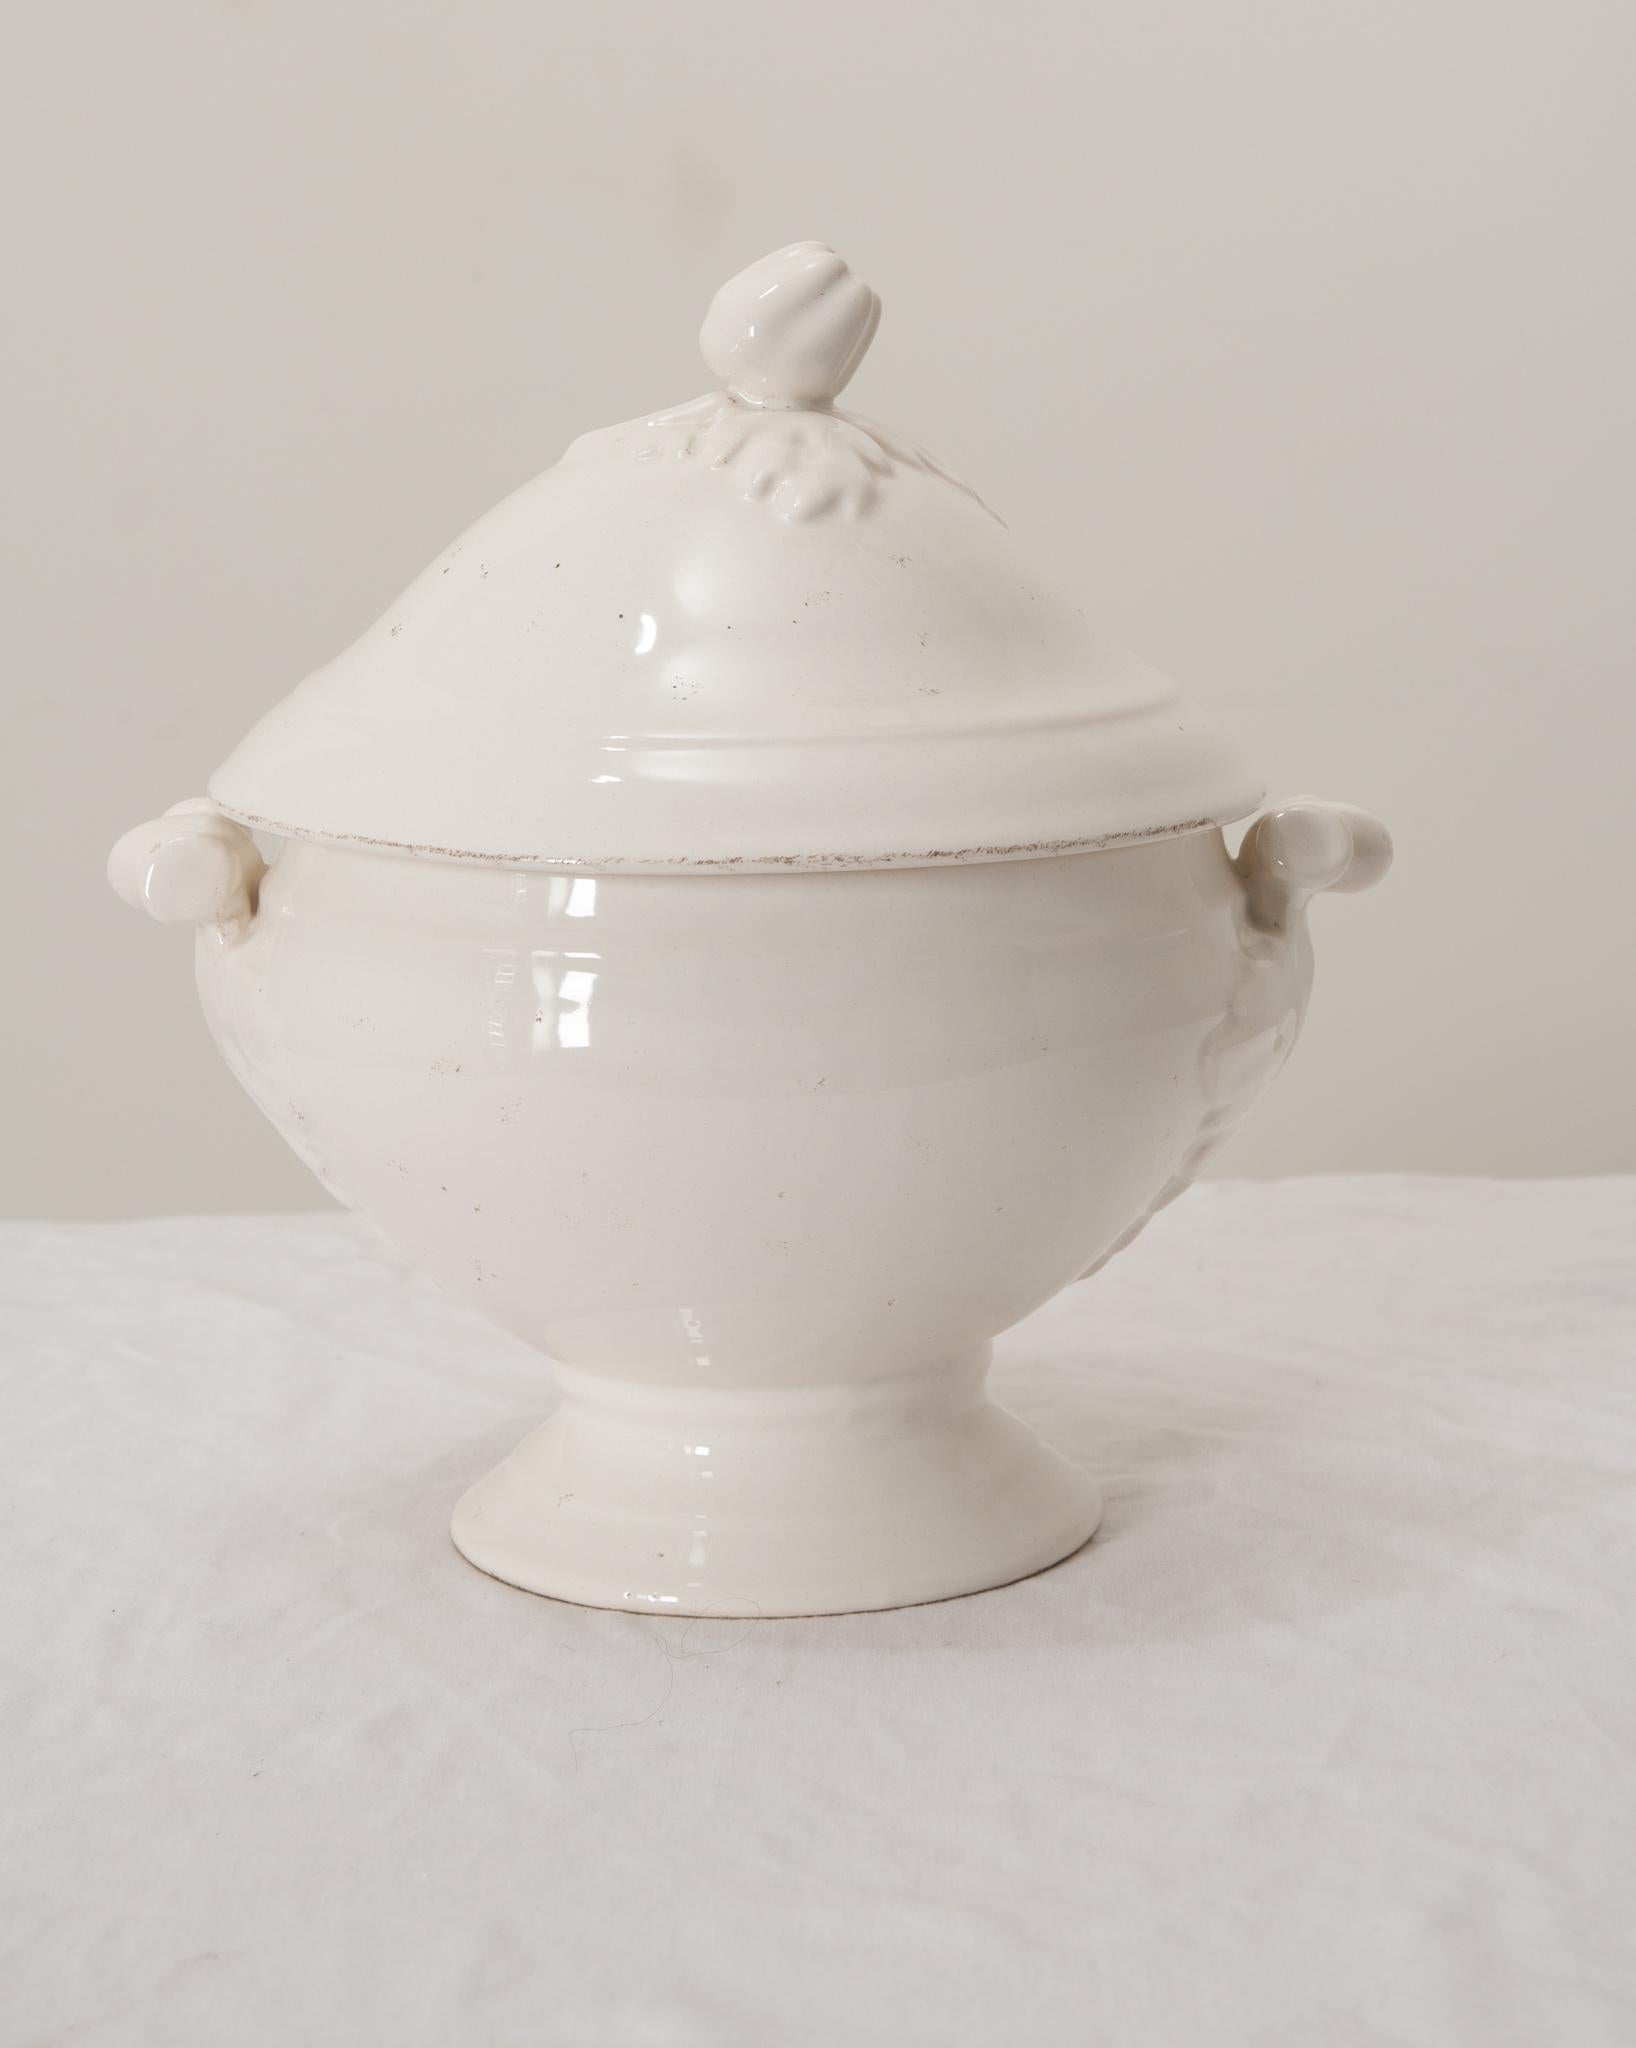 A gorgeous antique French white ironstone lidded soup tureen with pedestal base, perfect for serving soups, stews, and gumbos.This fine soup tureen has a decorative bell pepper finial on the lid, lovely ornate handles, and an opaque creamy white